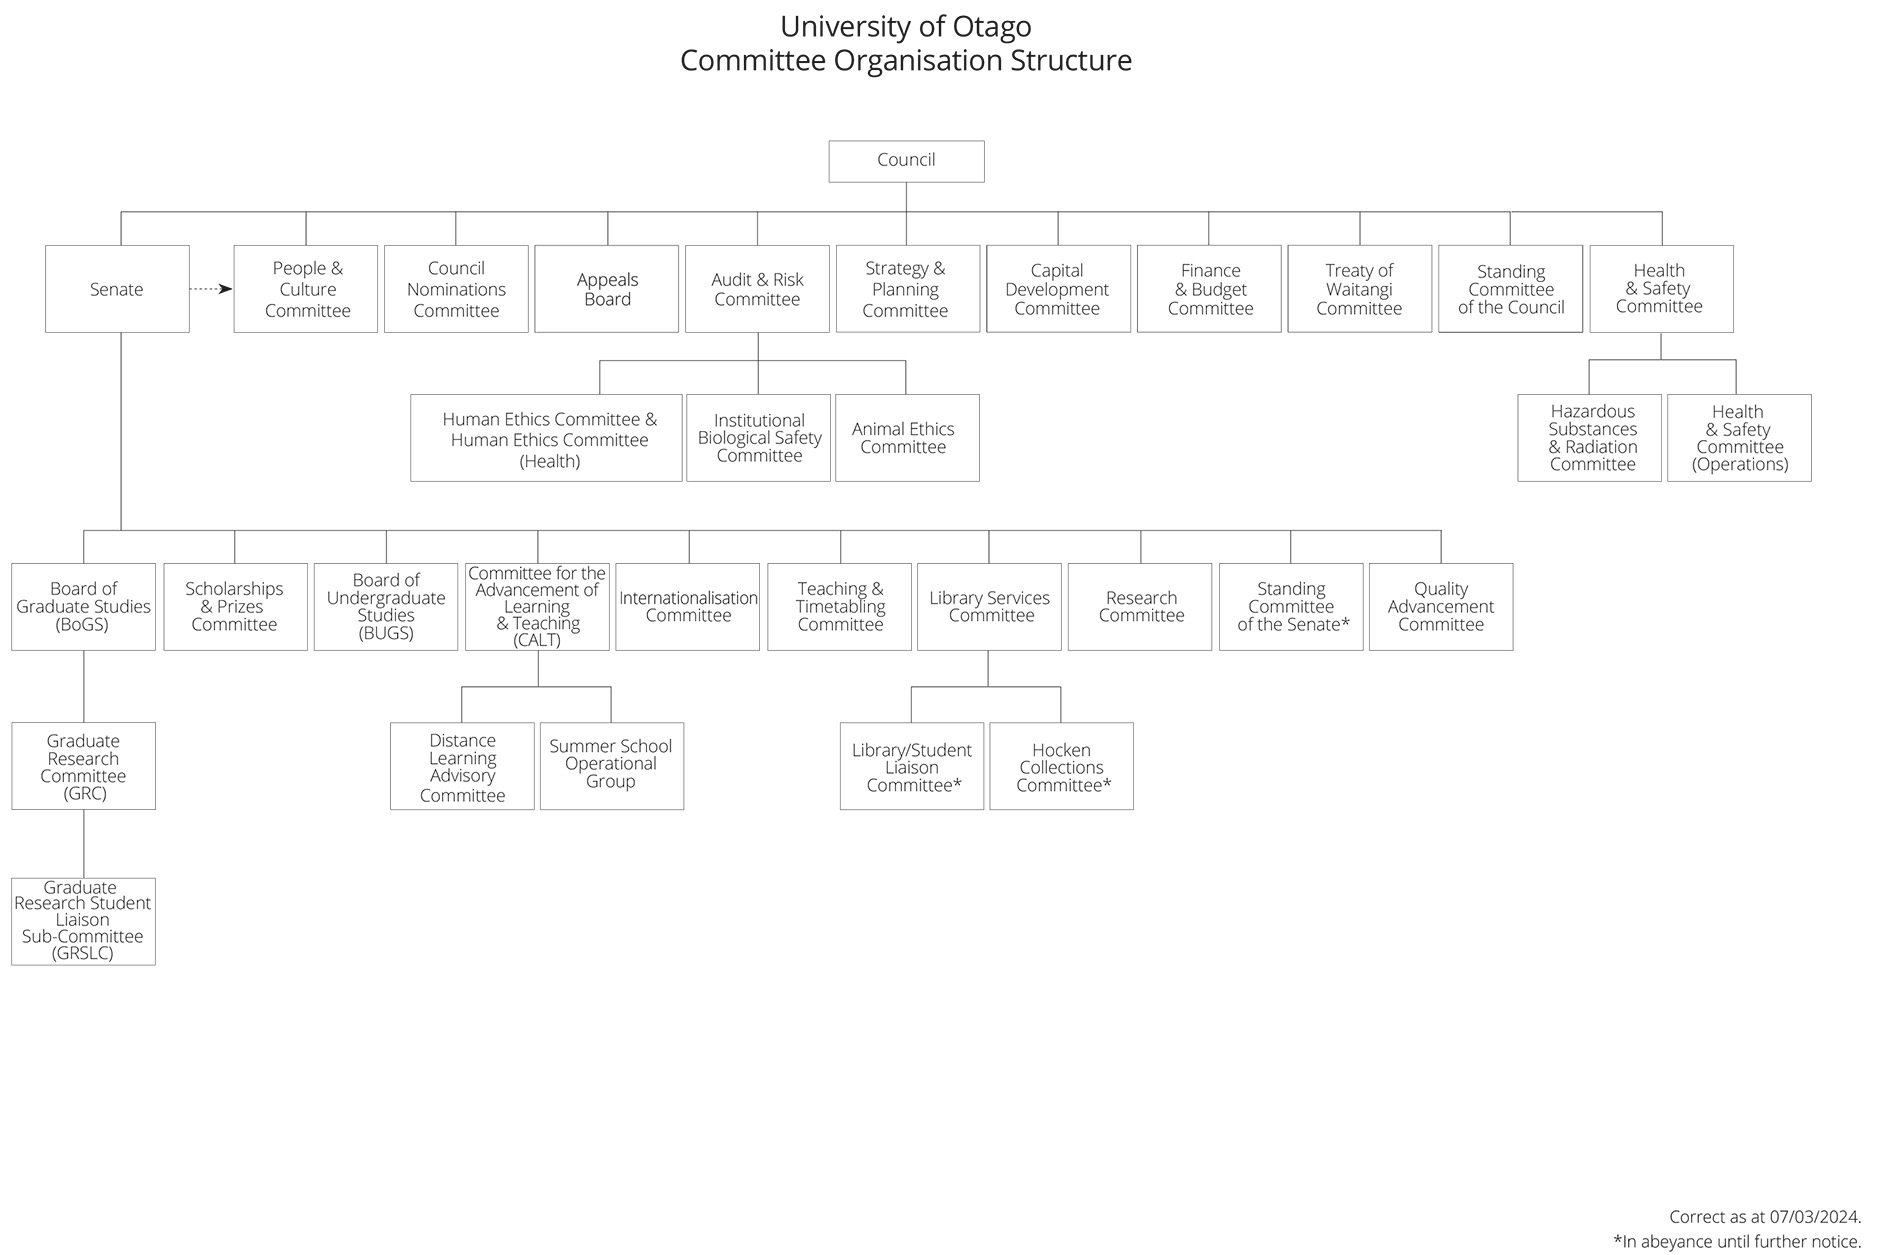 Inaccessible Committee Structure image.